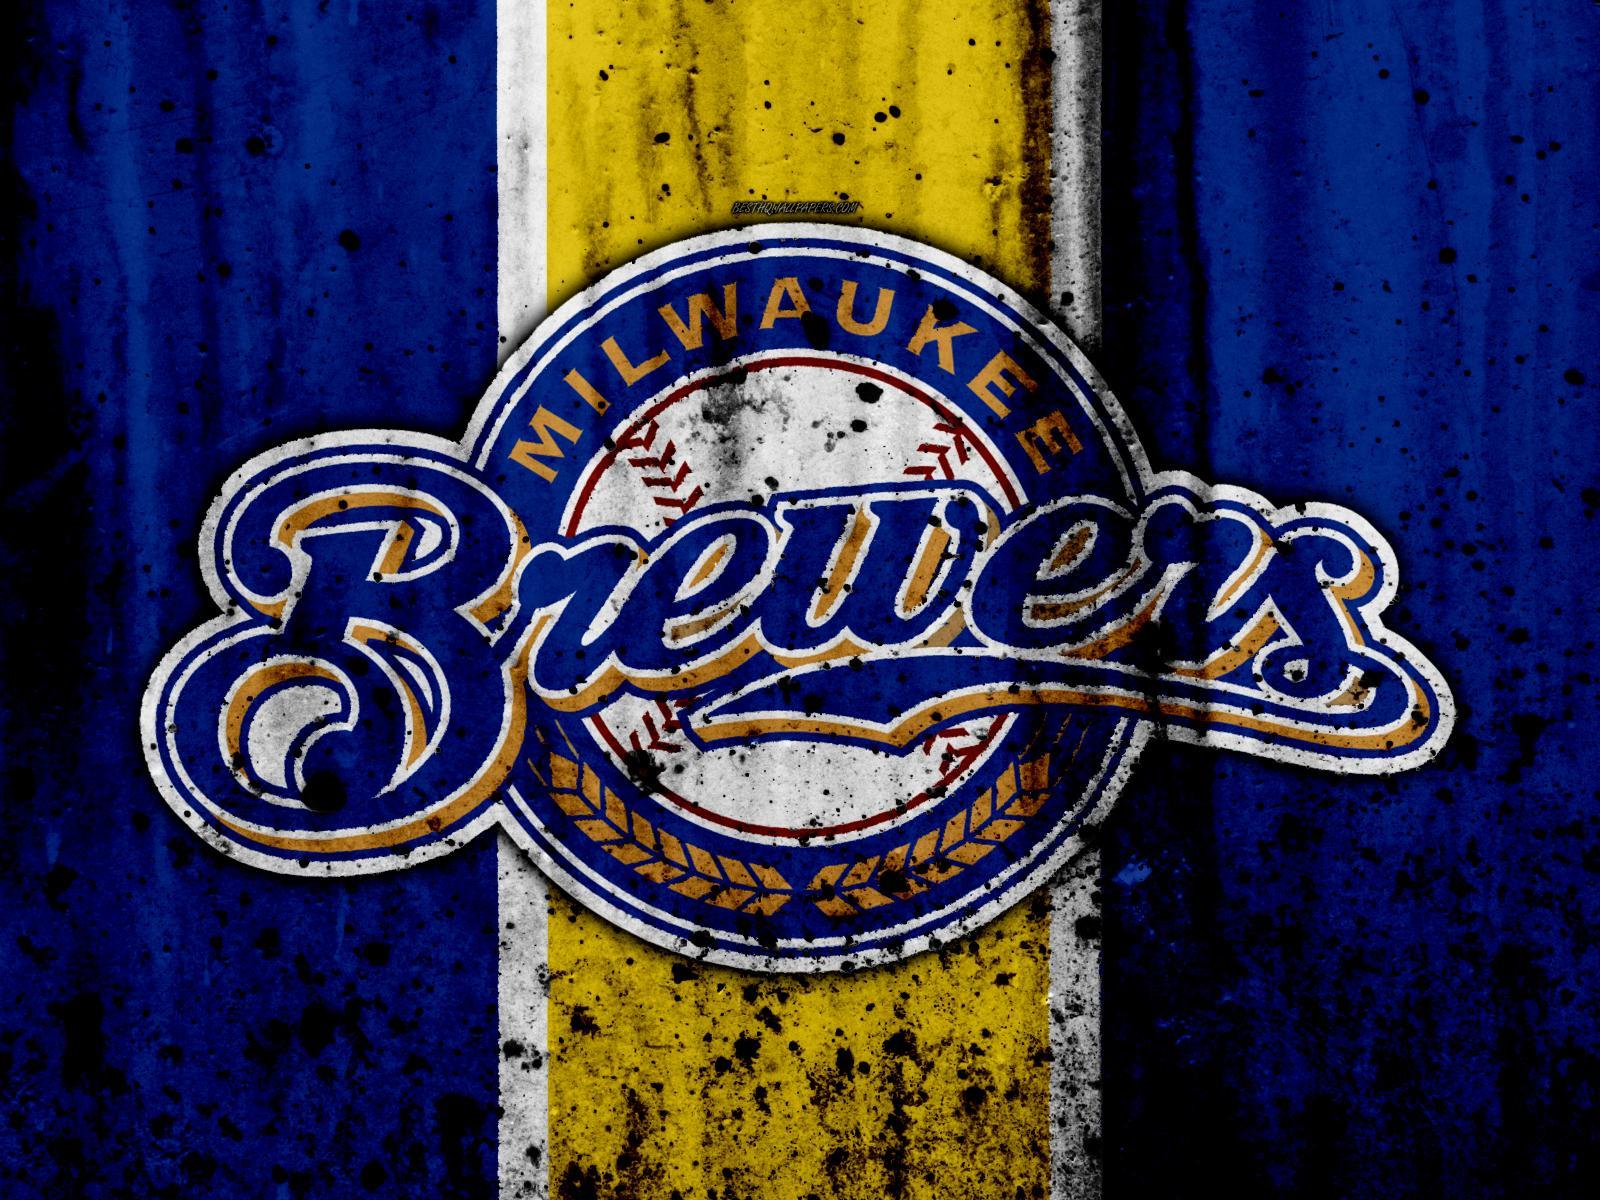 Cool looking 80's style glitch for phone : Brewers, brewers logo HD phone  wallpaper